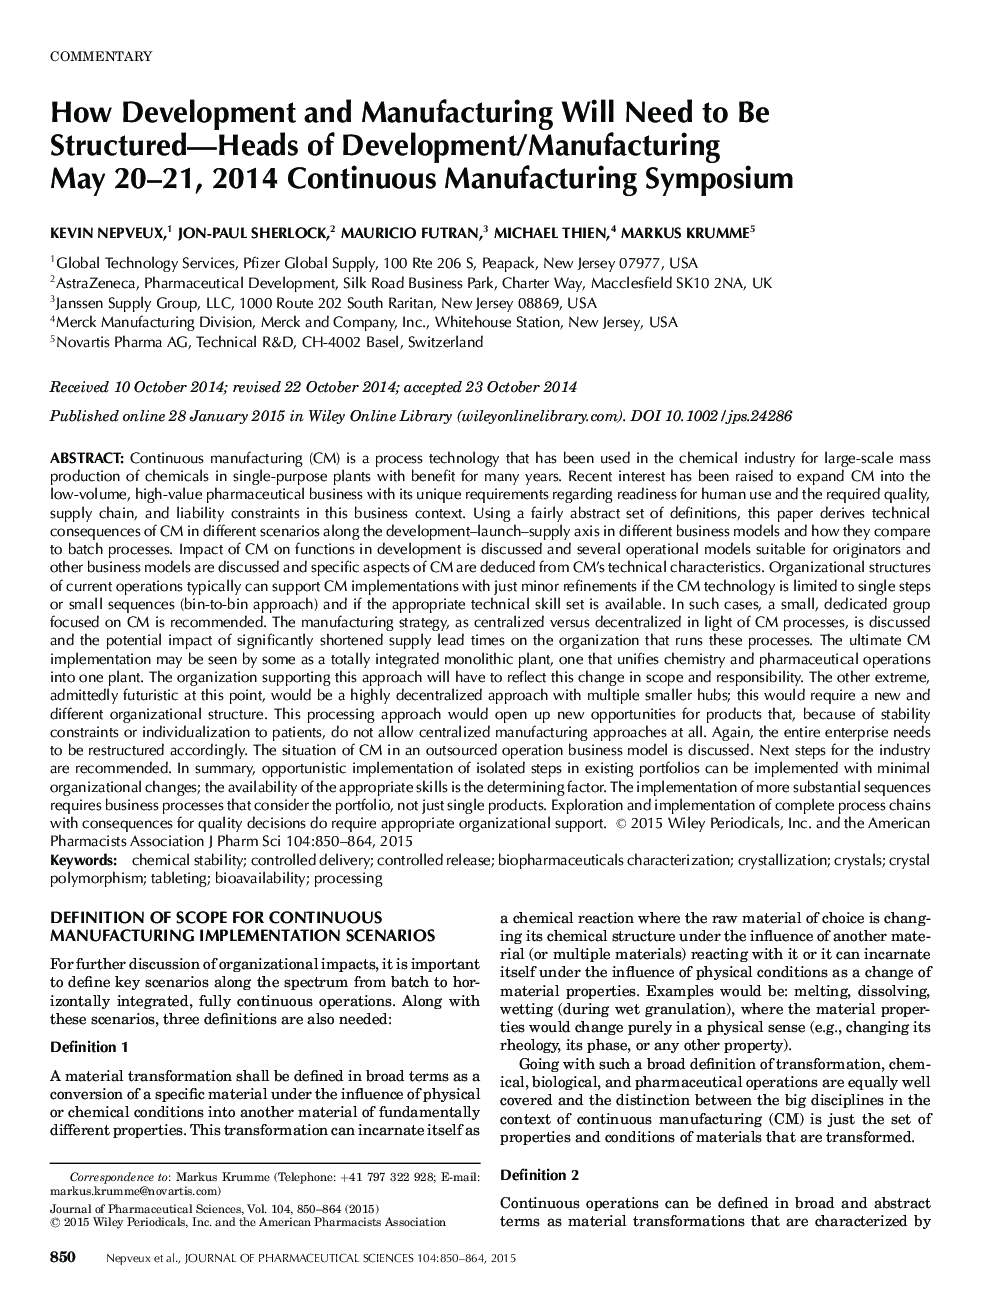 How Development and Manufacturing Will Need to Be Structured-Heads of Development/Manufacturing May 20-21, 2014 Continuous Manufacturing Symposium